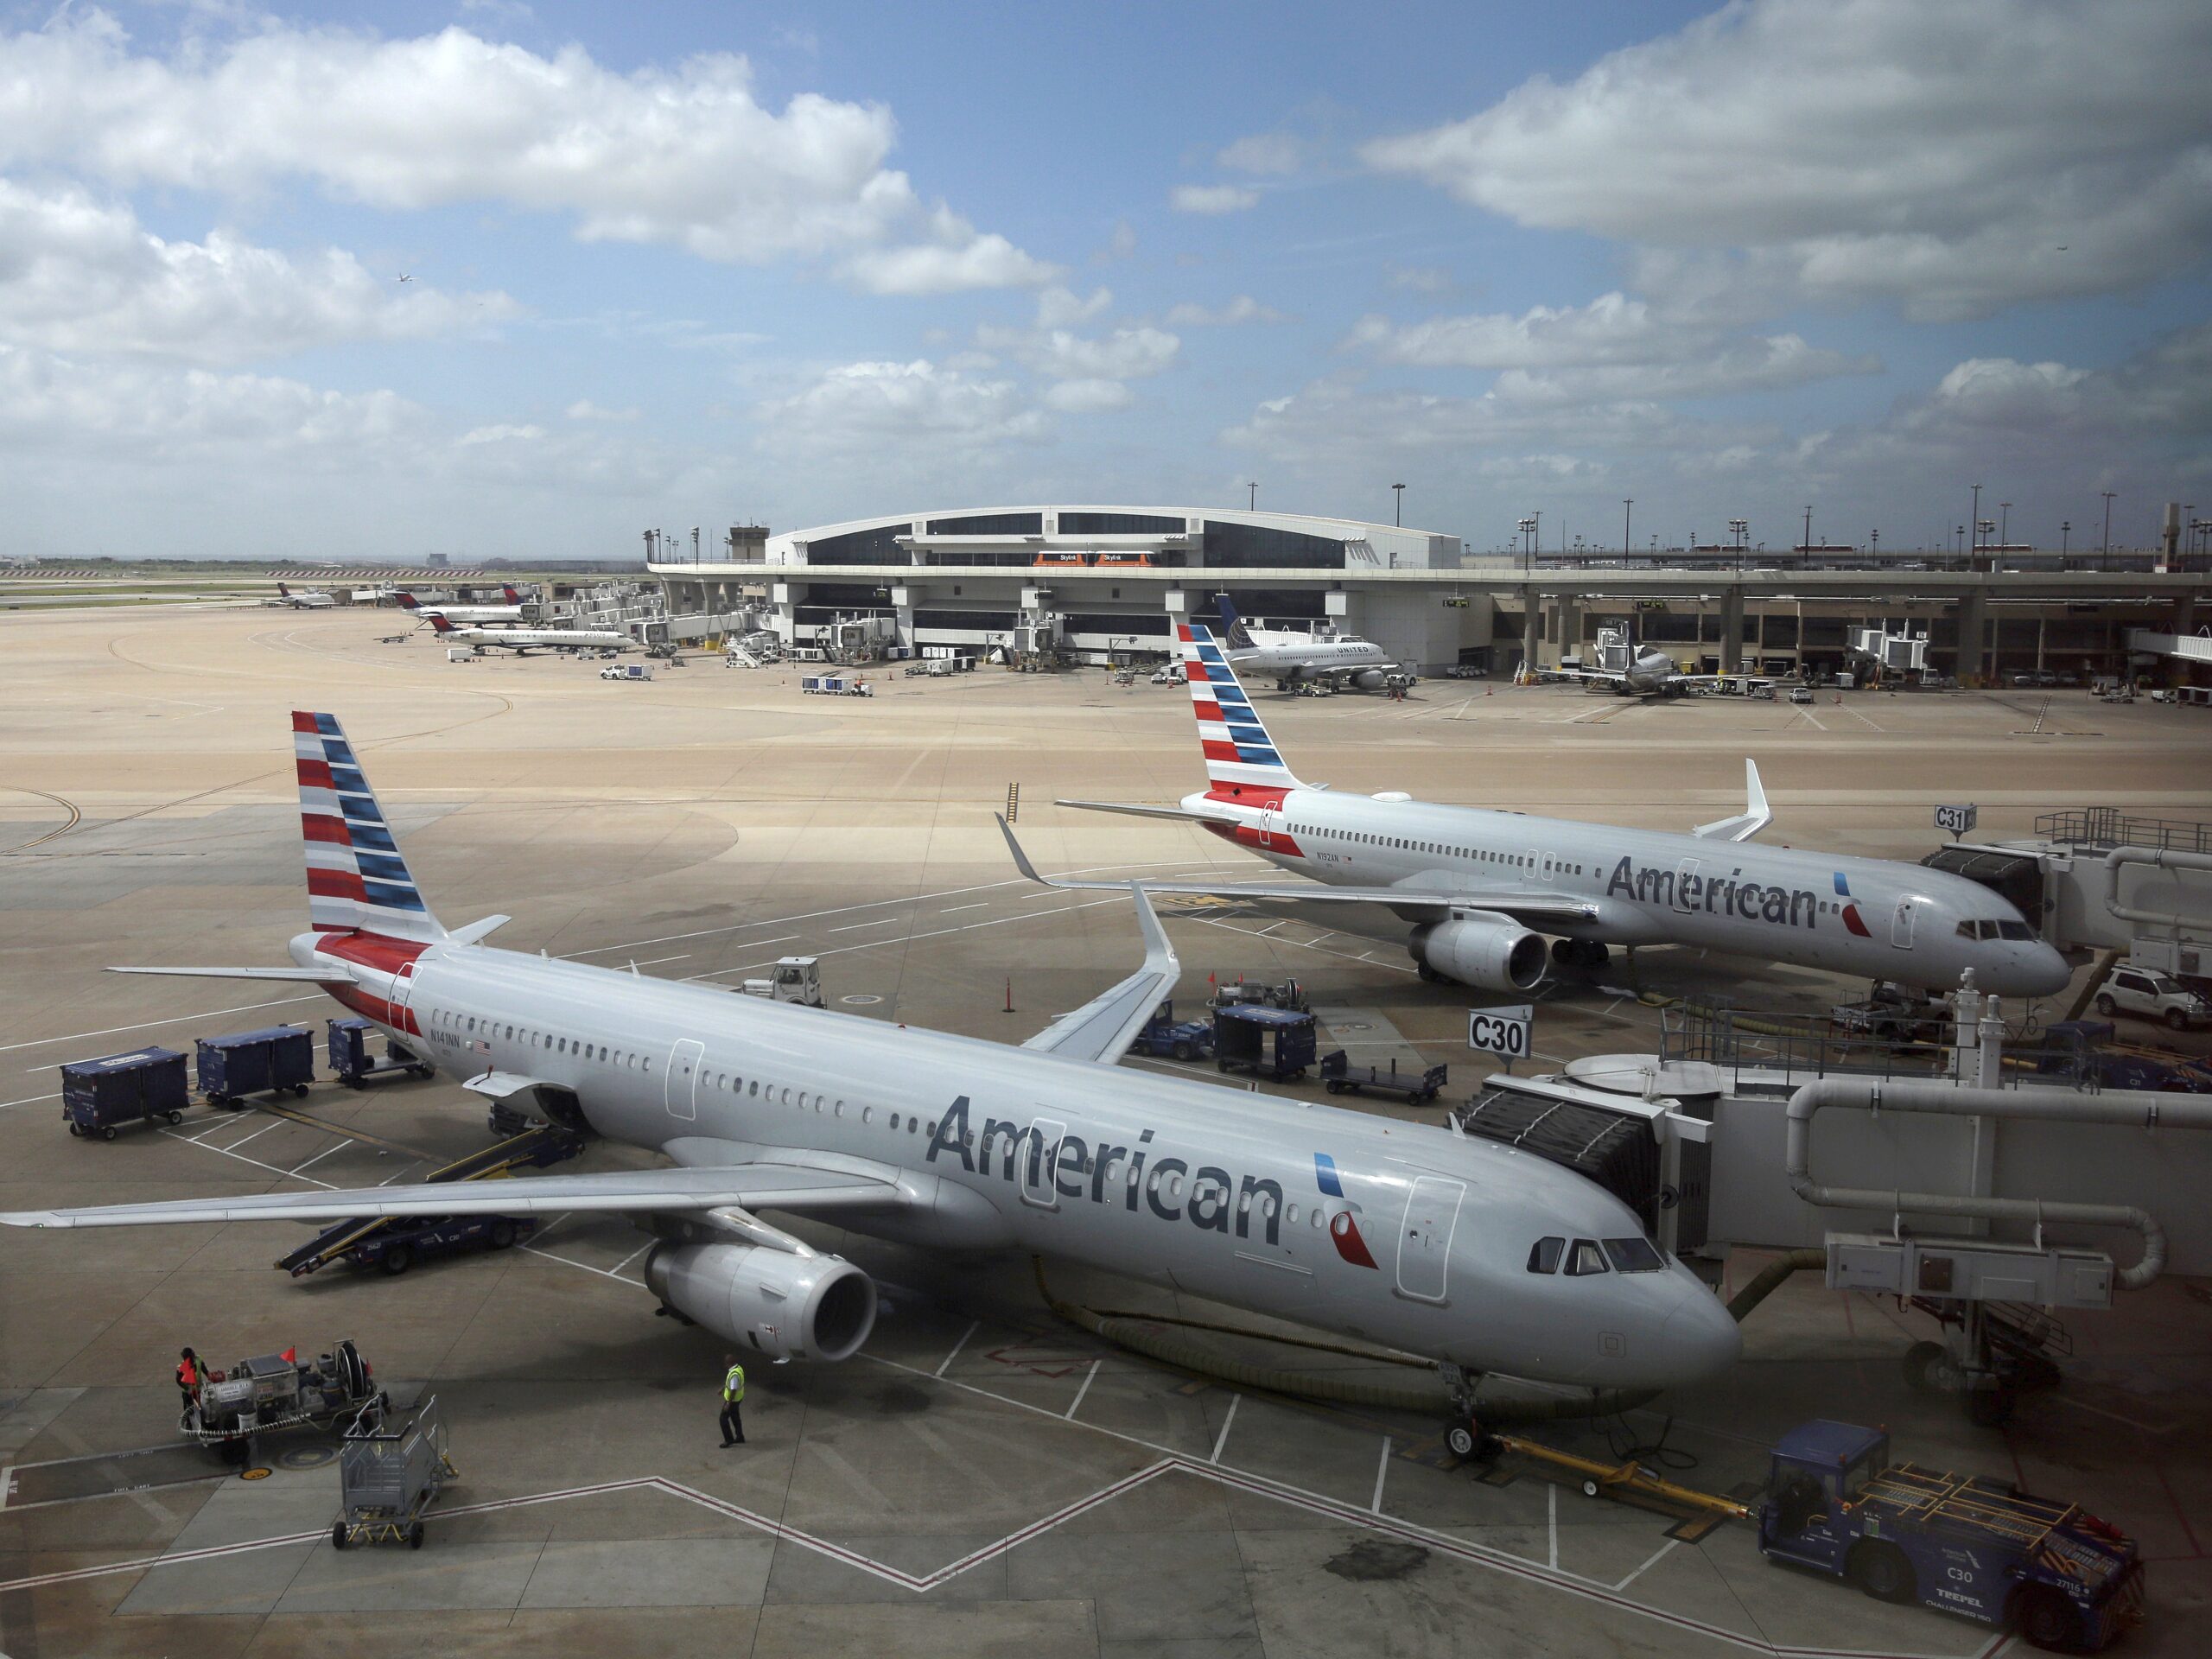 American Airlines faces a discrimination suit after removing 8 Black men from flight